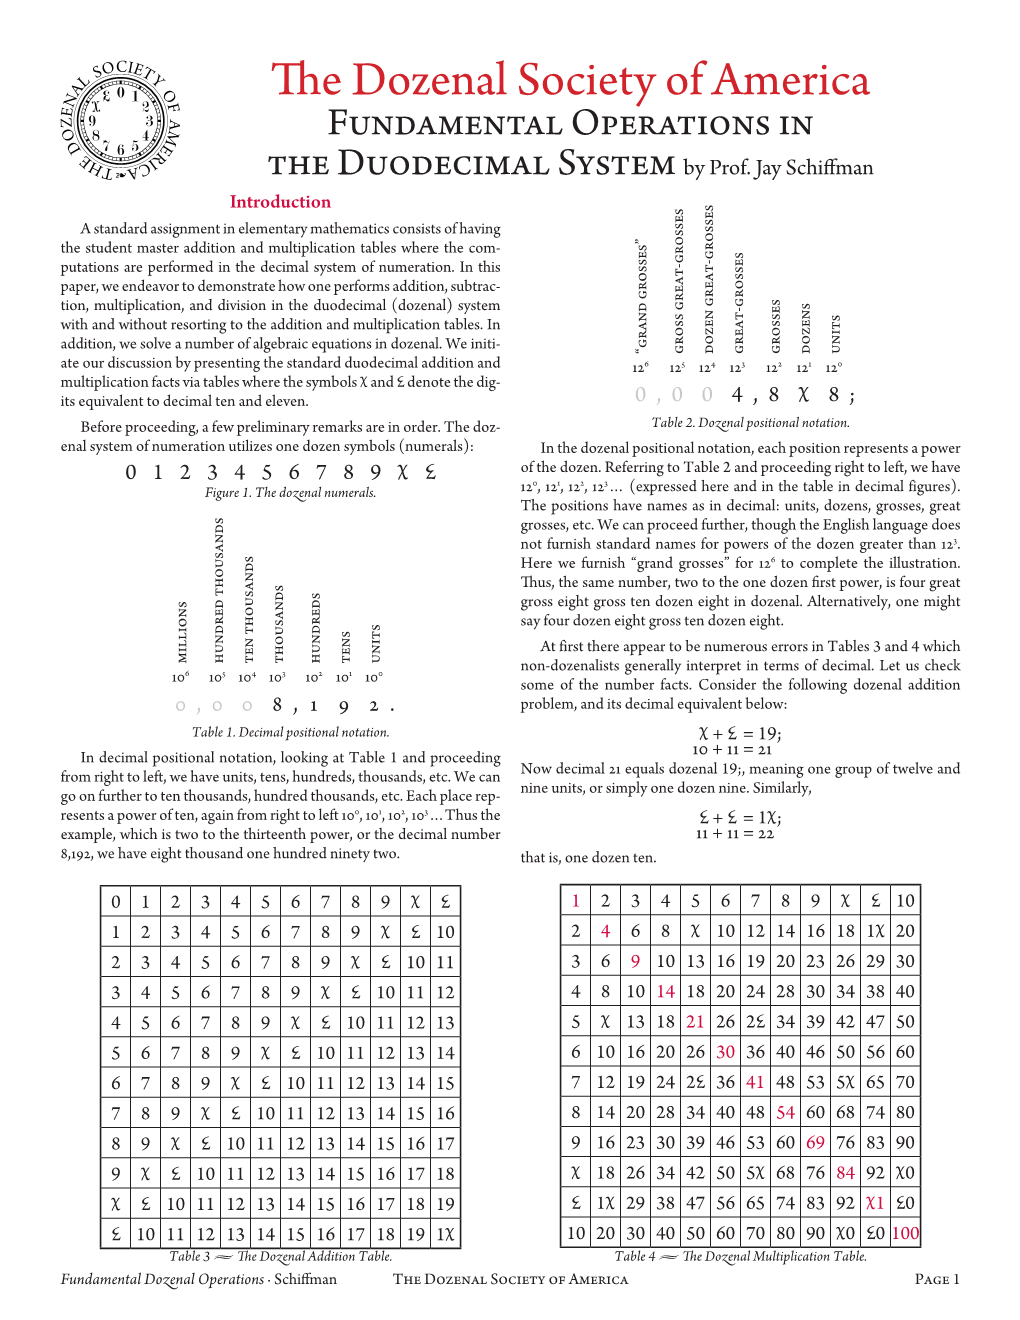 Fundamental Operations in the Duodecimal System by Prof. Jay Schiffman